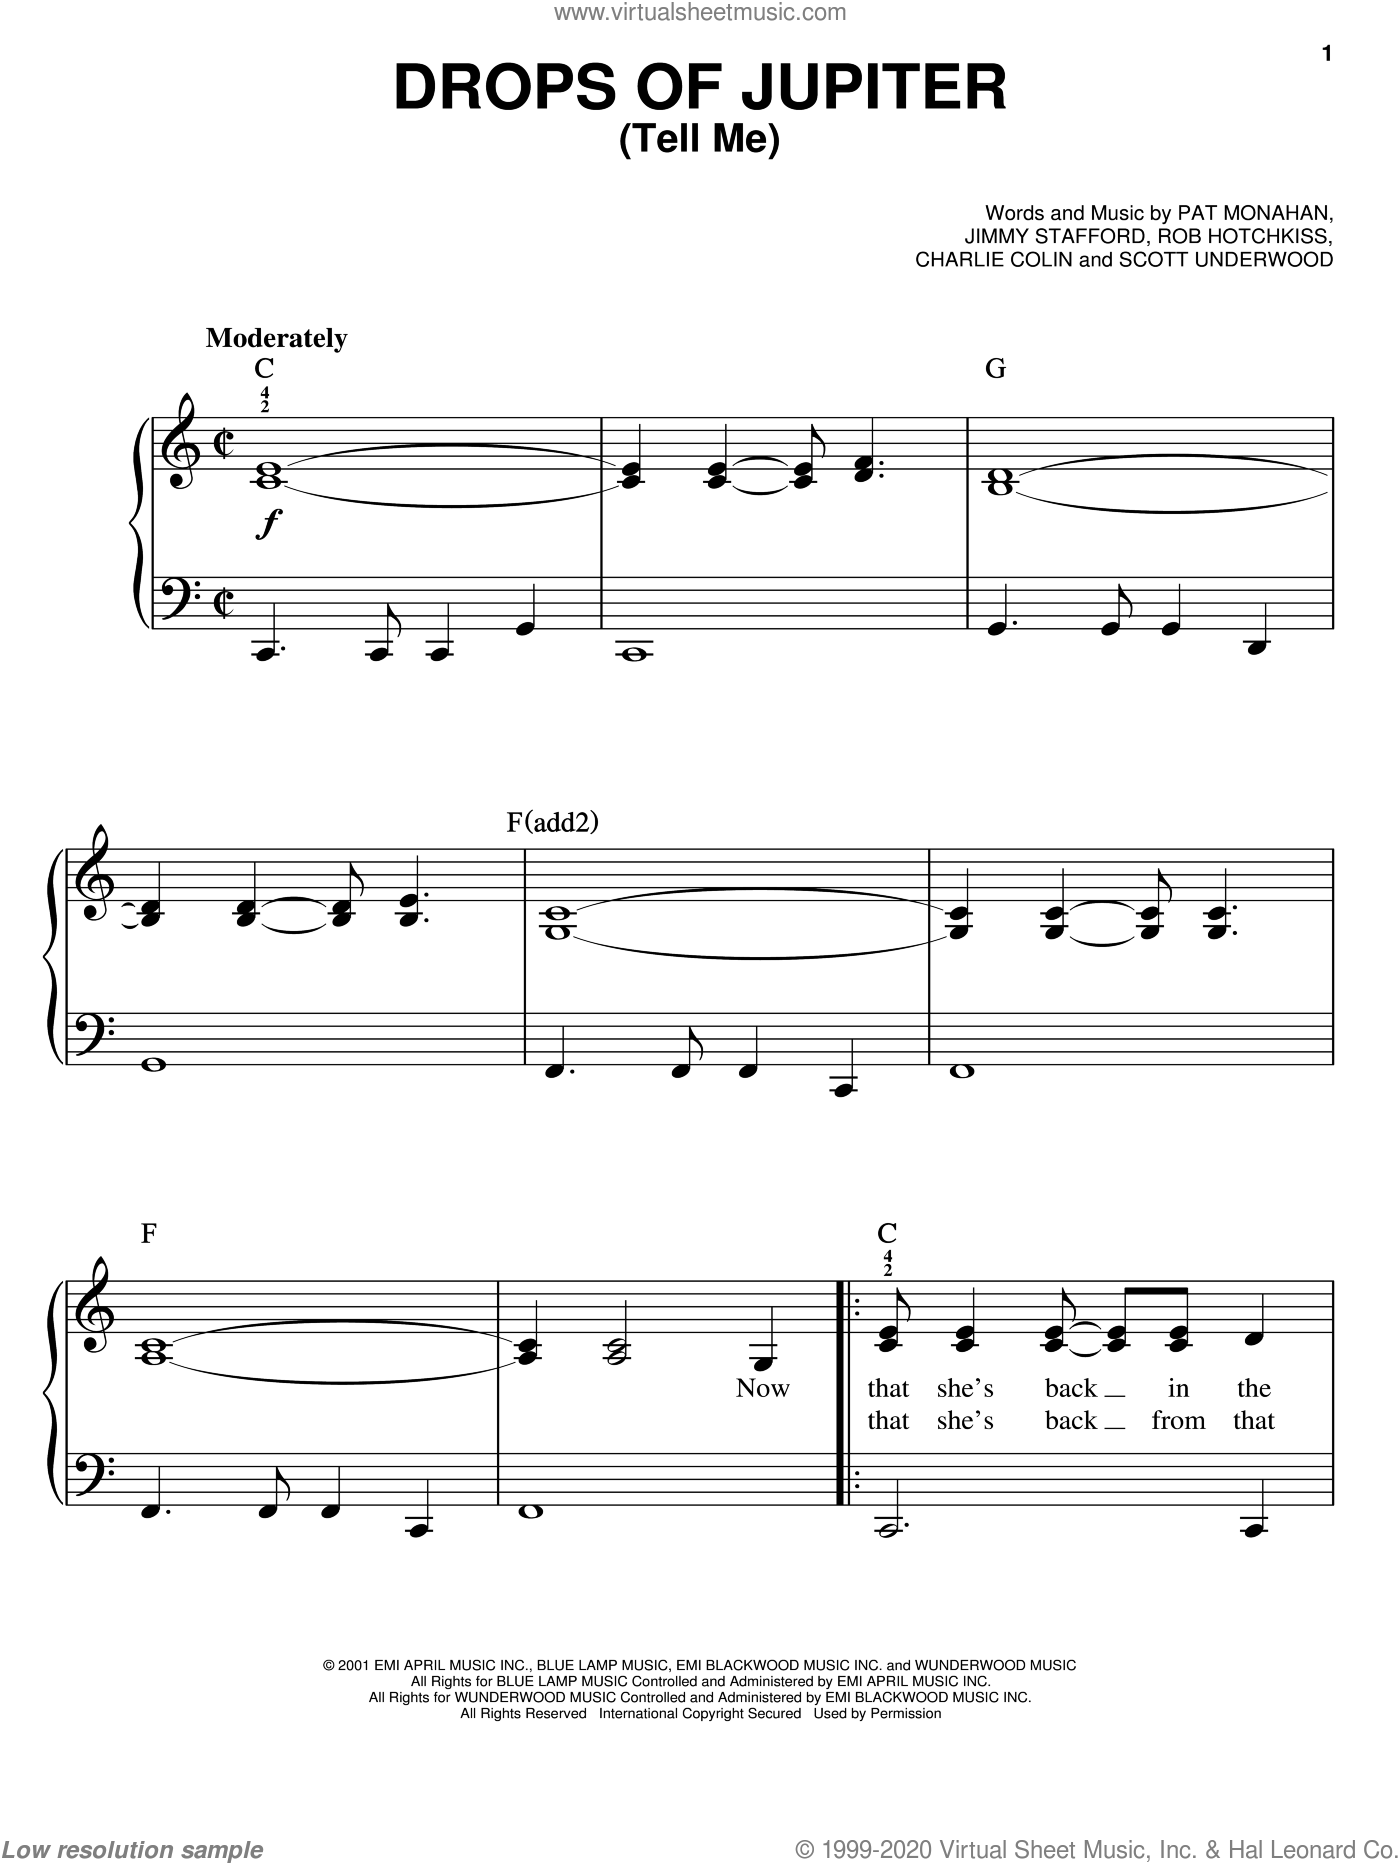 Train - Drops Of Jupiter (Tell Me), (easy) sheet music for piano solo